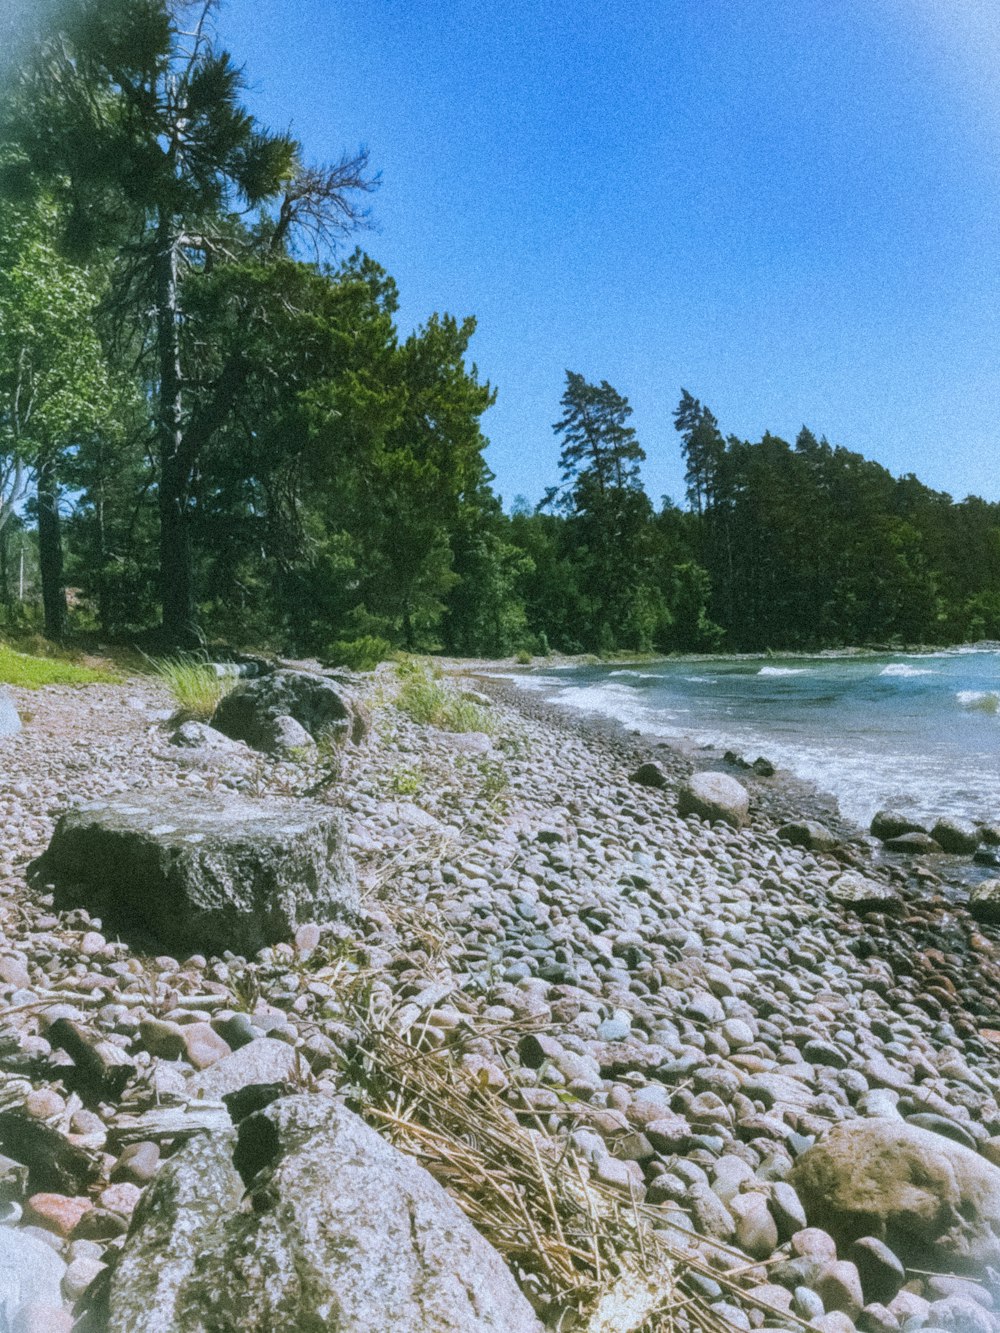 a sandy beach with rocks and trees in the background